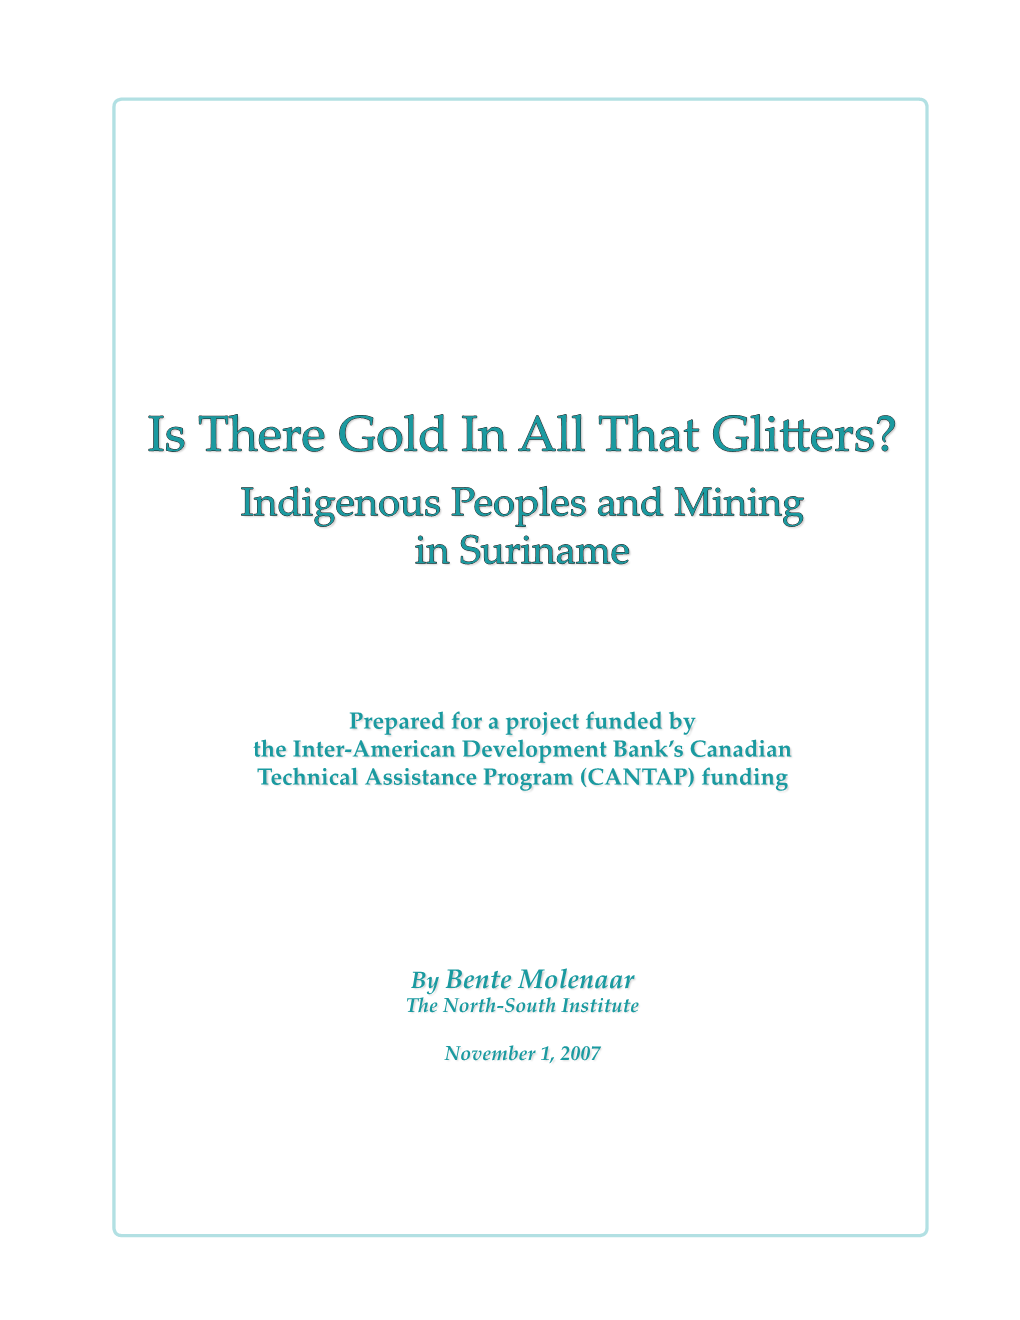 Is There Gold in All That Glitters? Indigenous Peoples and Mining in Suriname